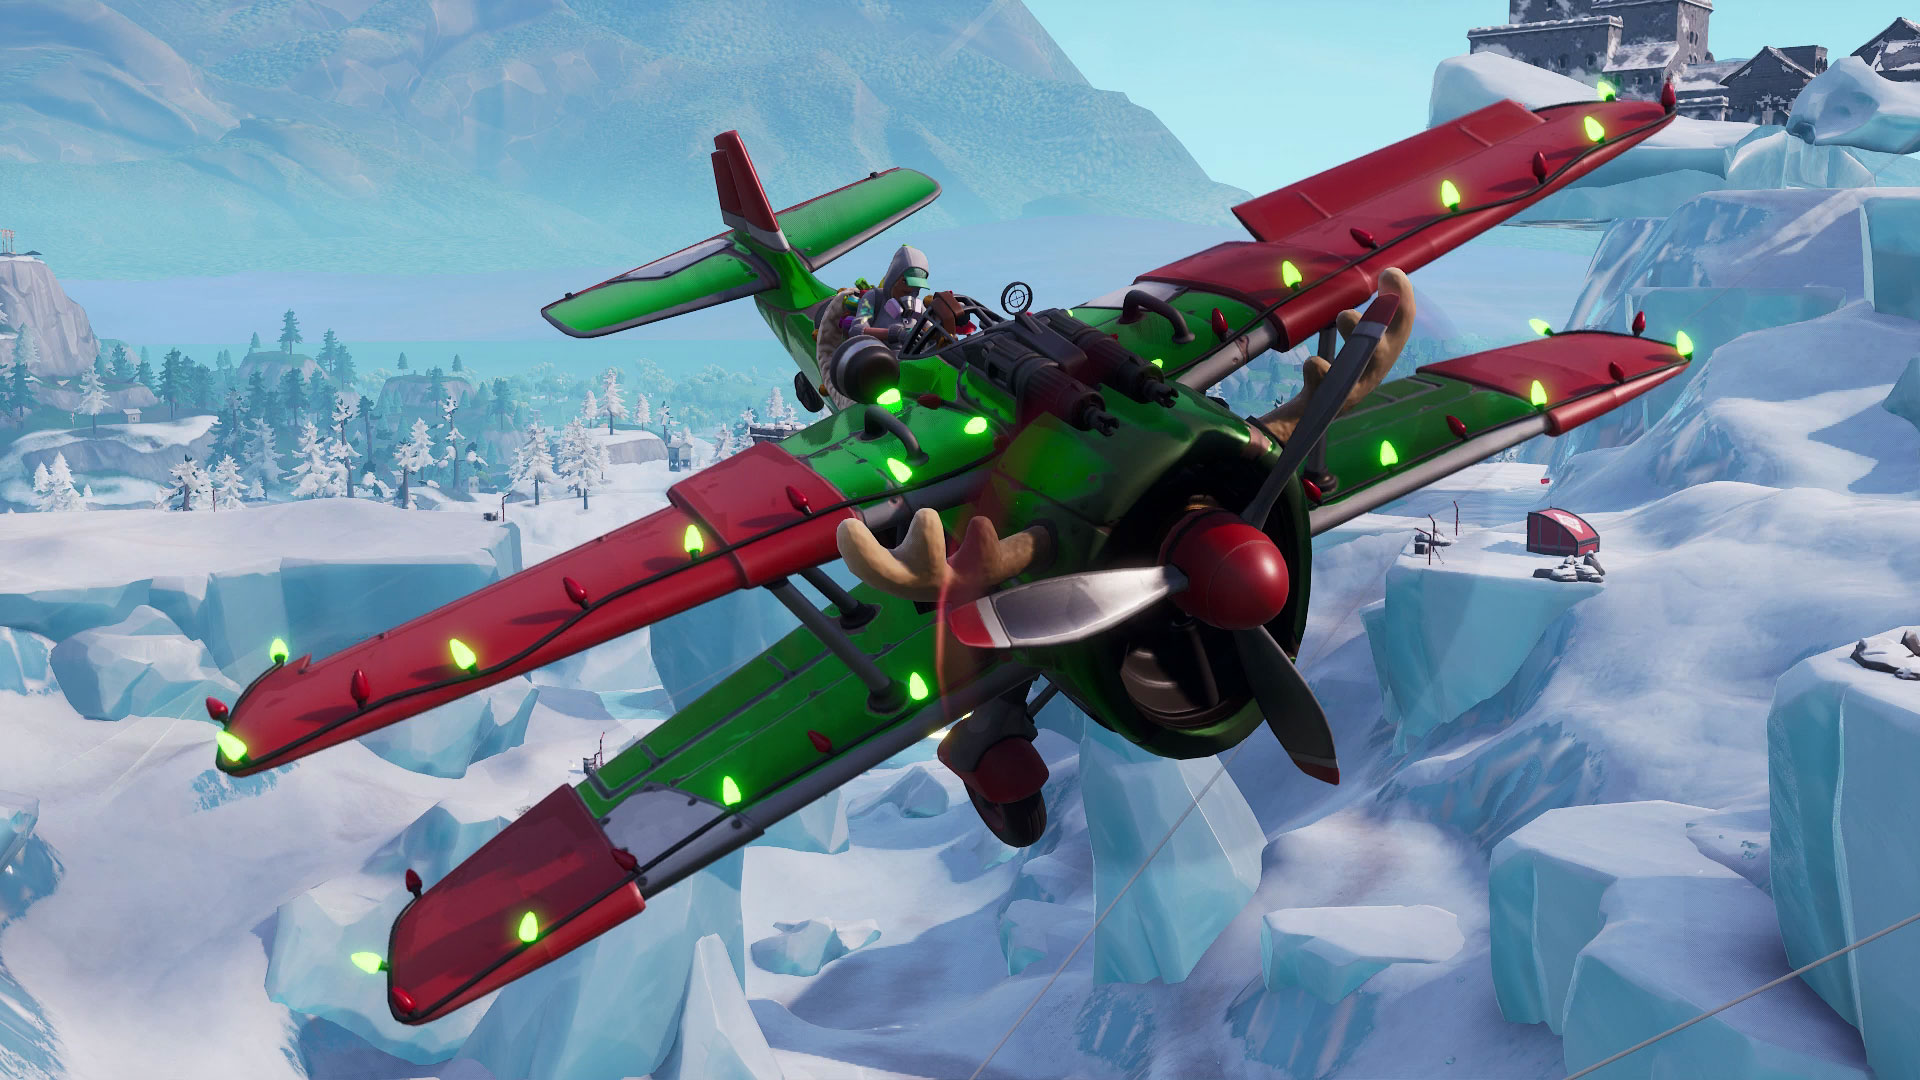 Where to find a Fortnite Plane and take to the skies for aerial combat